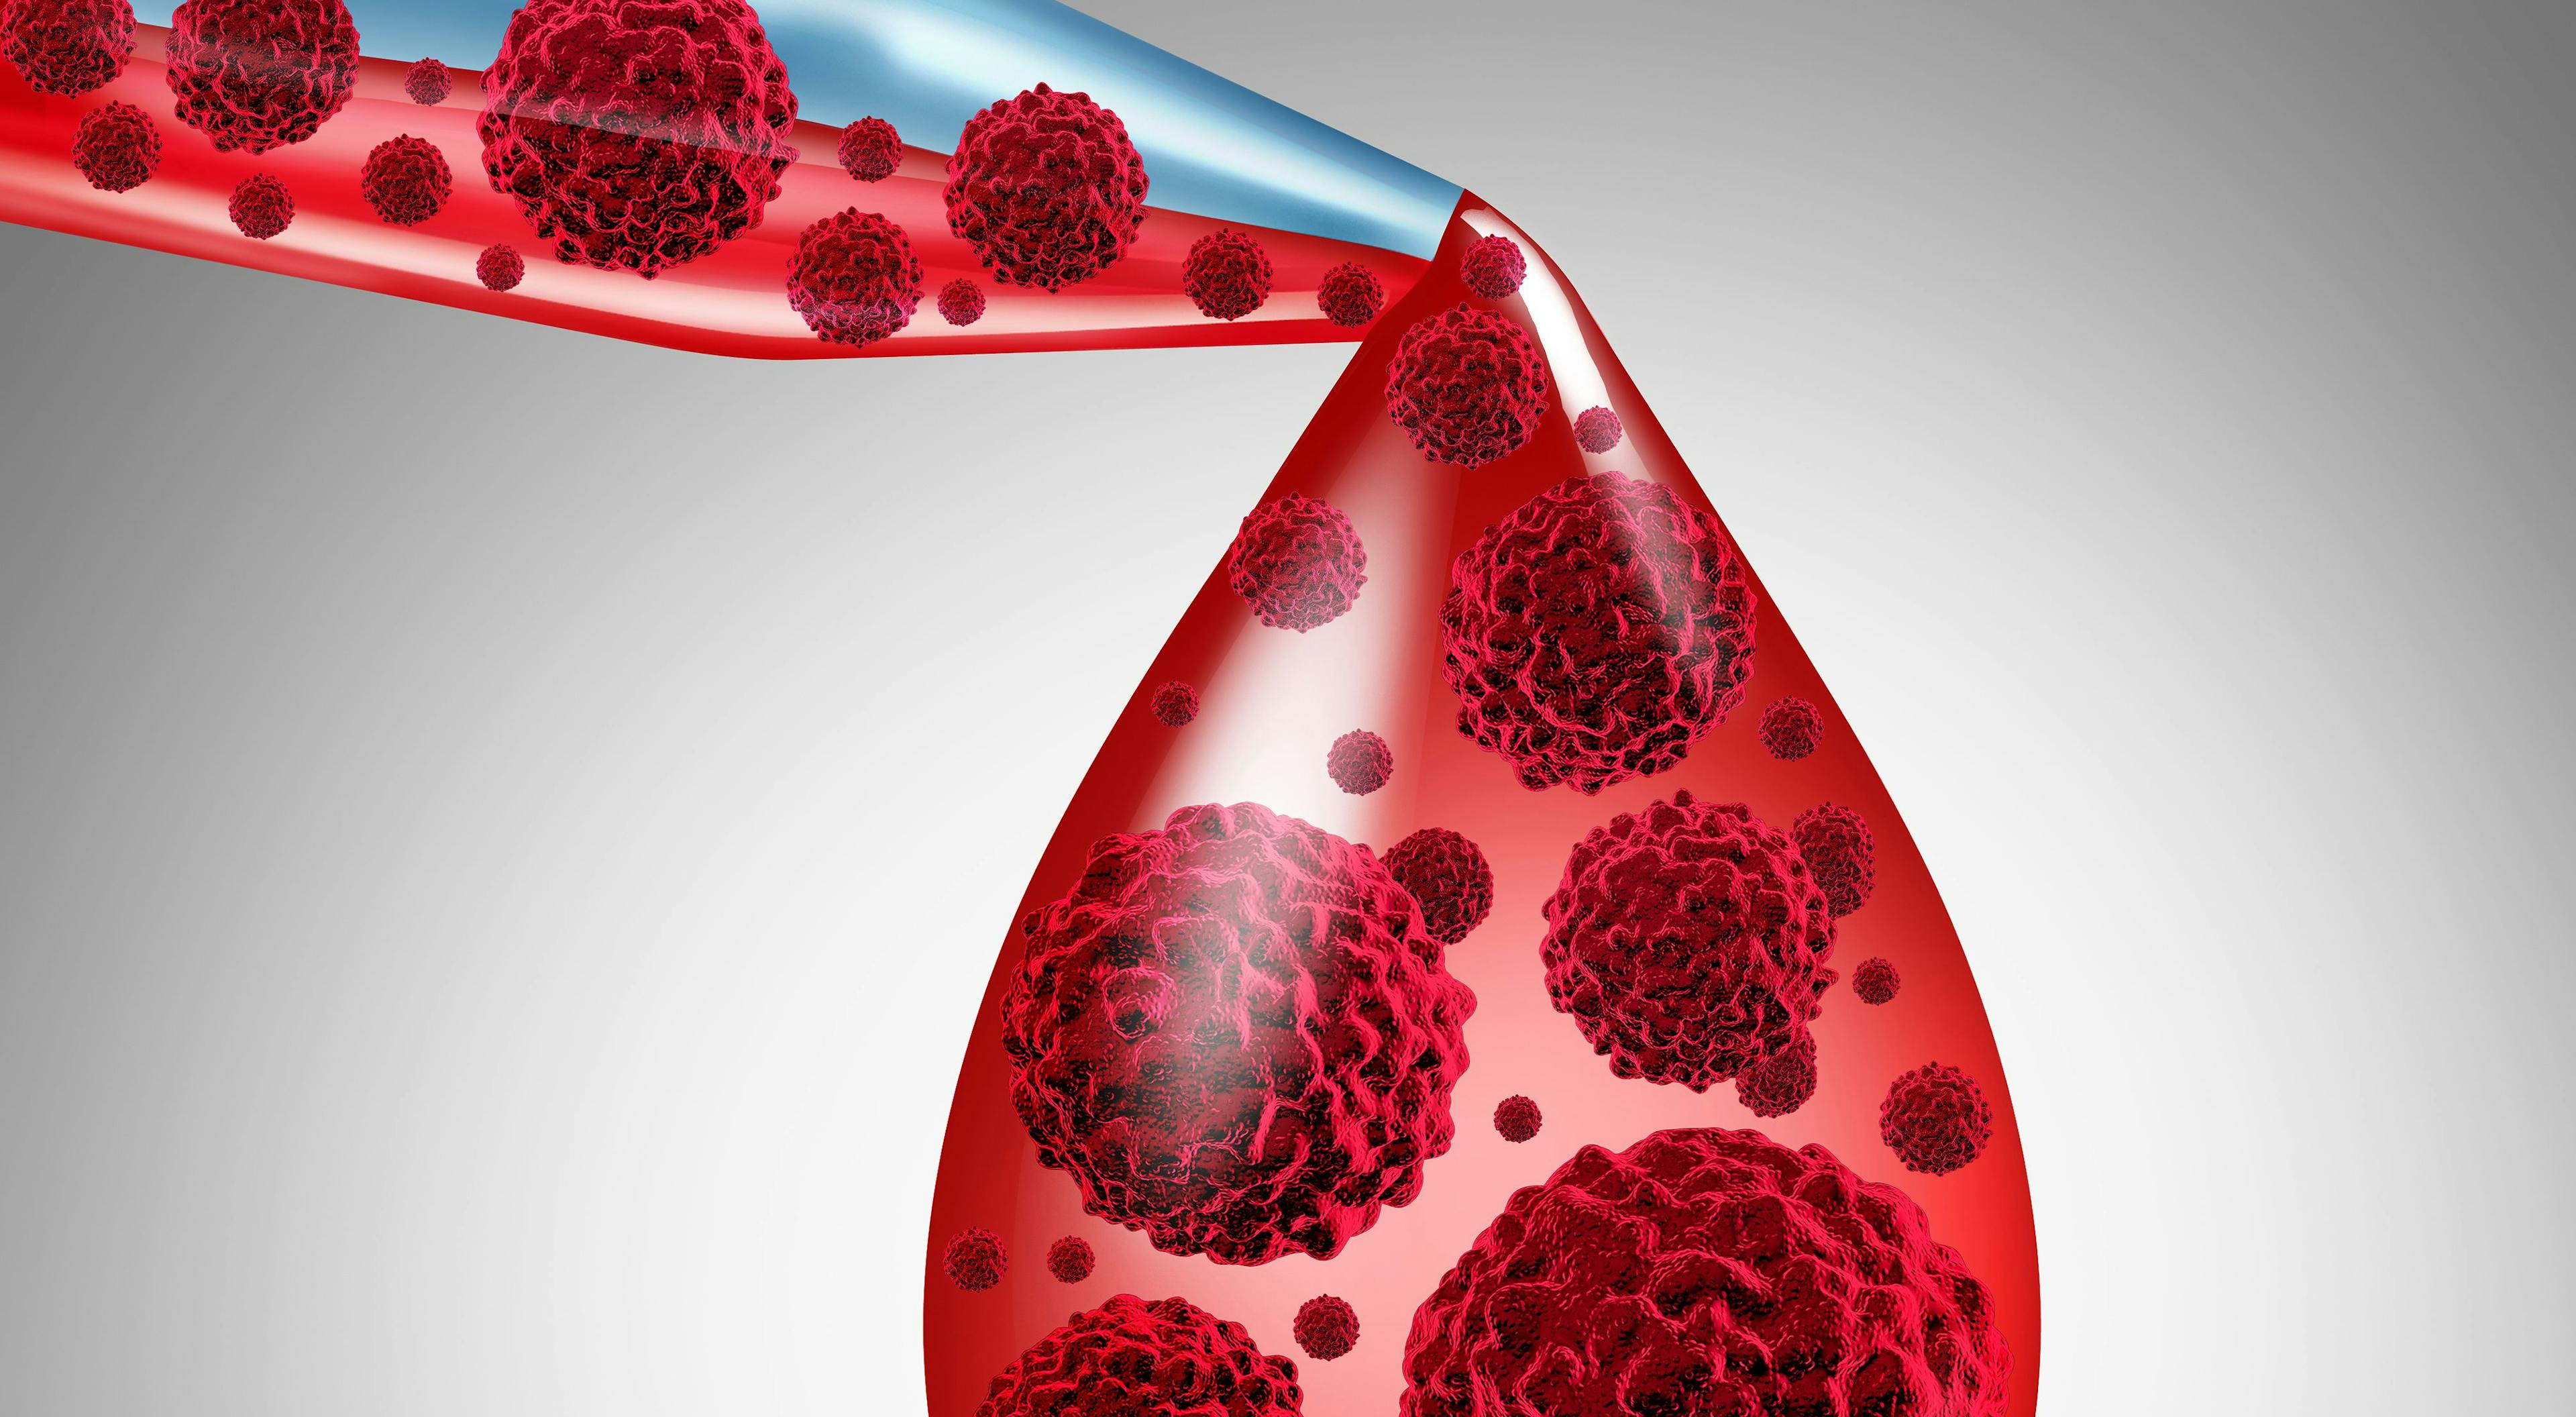 New and Upcoming Treatments Are Vastly Changing the Myeloma Space